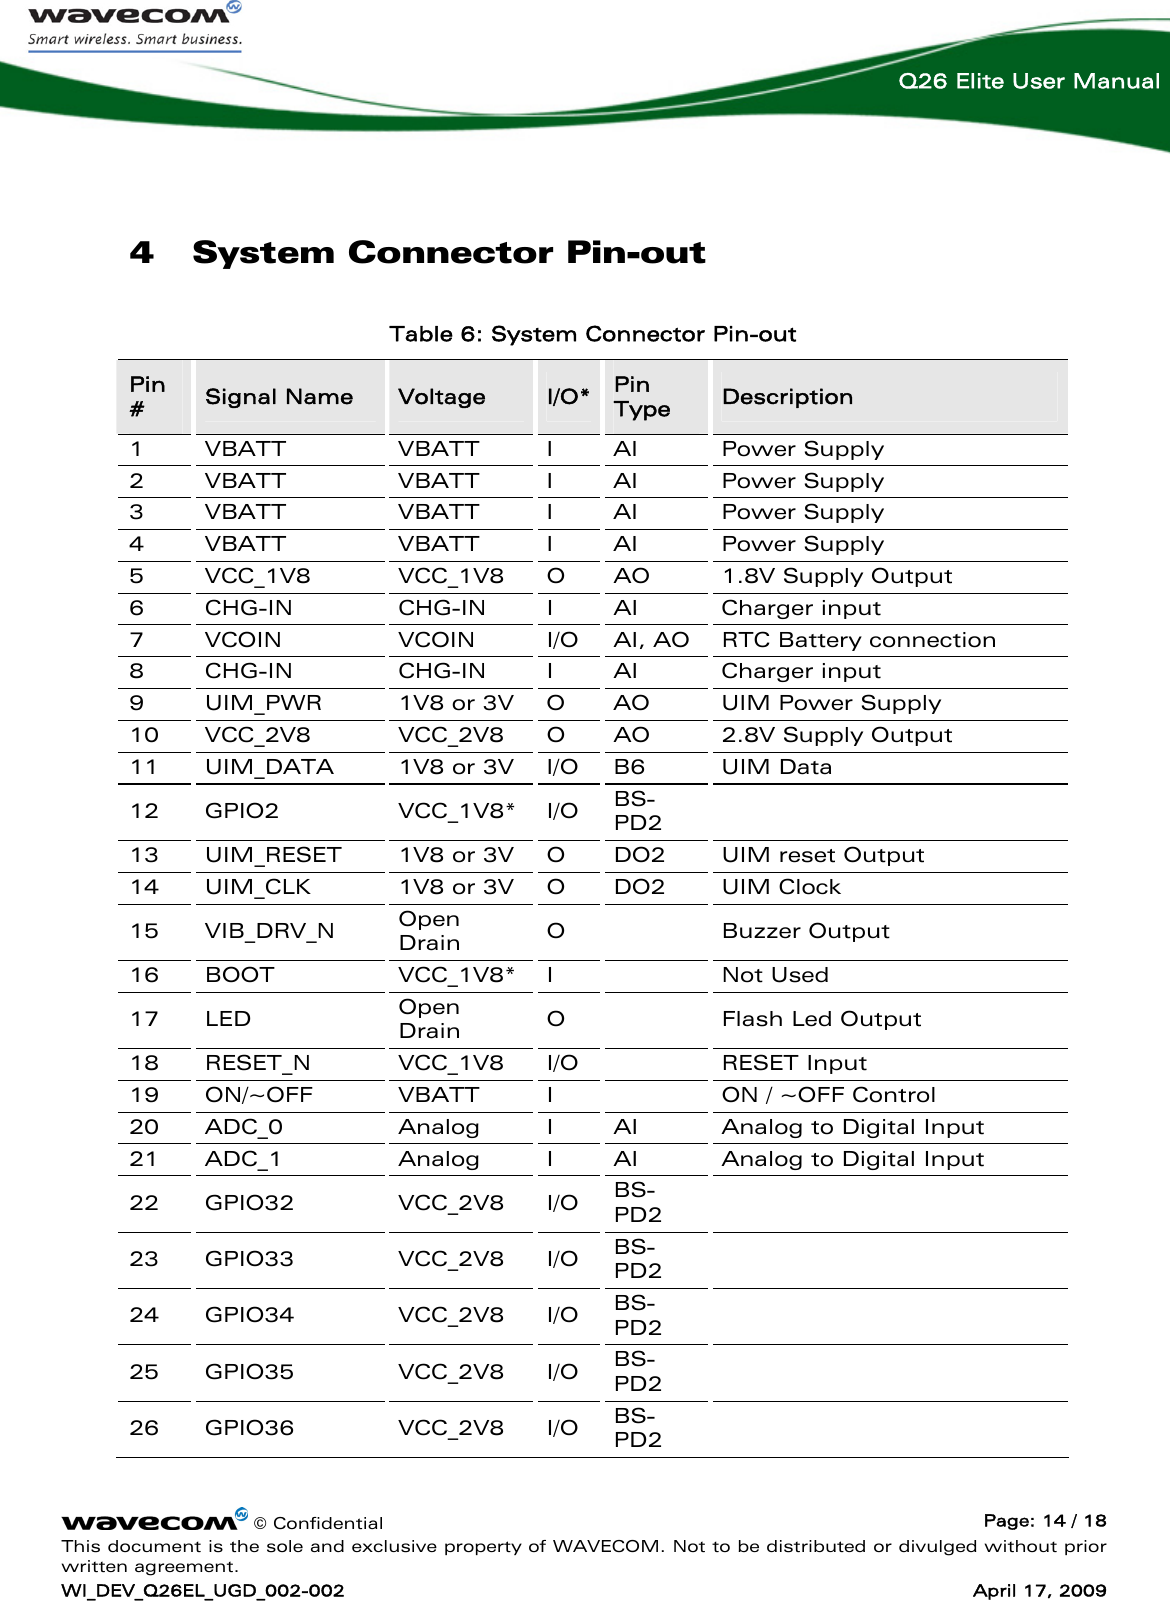    © Confidential  Page: 14 / 18 This document is the sole and exclusive property of WAVECOM. Not to be distributed or divulged without prior written agreement. WI_DEV_Q26EL_UGD_002-002  April 17, 2009  Q26 Elite User Manual 4 System Connector Pin-out Table 6: System Connector Pin-out Pin #  Signal Name  Voltage  I/O* Pin Type  Description 1 VBATT  VBATT  I AI  Power Supply 2 VBATT  VBATT  I AI  Power Supply 3 VBATT  VBATT  I AI  Power Supply 4 VBATT  VBATT  I AI  Power Supply 5  VCC_1V8  VCC_1V8  O  AO  1.8V Supply Output 6 CHG-IN  CHG-IN I AI  Charger input 7  VCOIN  VCOIN  I/O  AI, AO  RTC Battery connection 8 CHG-IN  CHG-IN I AI  Charger input 9  UIM_PWR  1V8 or 3V  O  AO  UIM Power Supply 10  VCC_2V8  VCC_2V8  O  AO  2.8V Supply Output 11  UIM_DATA  1V8 or 3V  I/O  B6  UIM Data 12 GPIO2  VCC_1V8* I/O BS-PD2   13  UIM_RESET  1V8 or 3V  O  DO2  UIM reset Output 14  UIM_CLK  1V8 or 3V  O  DO2  UIM Clock 15 VIB_DRV_N  Open Drain  O   Buzzer Output 16 BOOT  VCC_1V8* I    Not Used 17 LED  Open Drain  O   Flash Led Output 18 RESET_N  VCC_1V8 I/O   RESET Input 19  ON/~OFF  VBATT  I    ON / ~OFF Control 20  ADC_0  Analog  I  AI  Analog to Digital Input 21  ADC_1  Analog  I  AI  Analog to Digital Input 22 GPIO32  VCC_2V8 I/O BS-PD2   23 GPIO33  VCC_2V8 I/O BS-PD2   24 GPIO34  VCC_2V8 I/O BS-PD2   25 GPIO35  VCC_2V8 I/O BS-PD2   26 GPIO36  VCC_2V8 I/O BS-PD2   